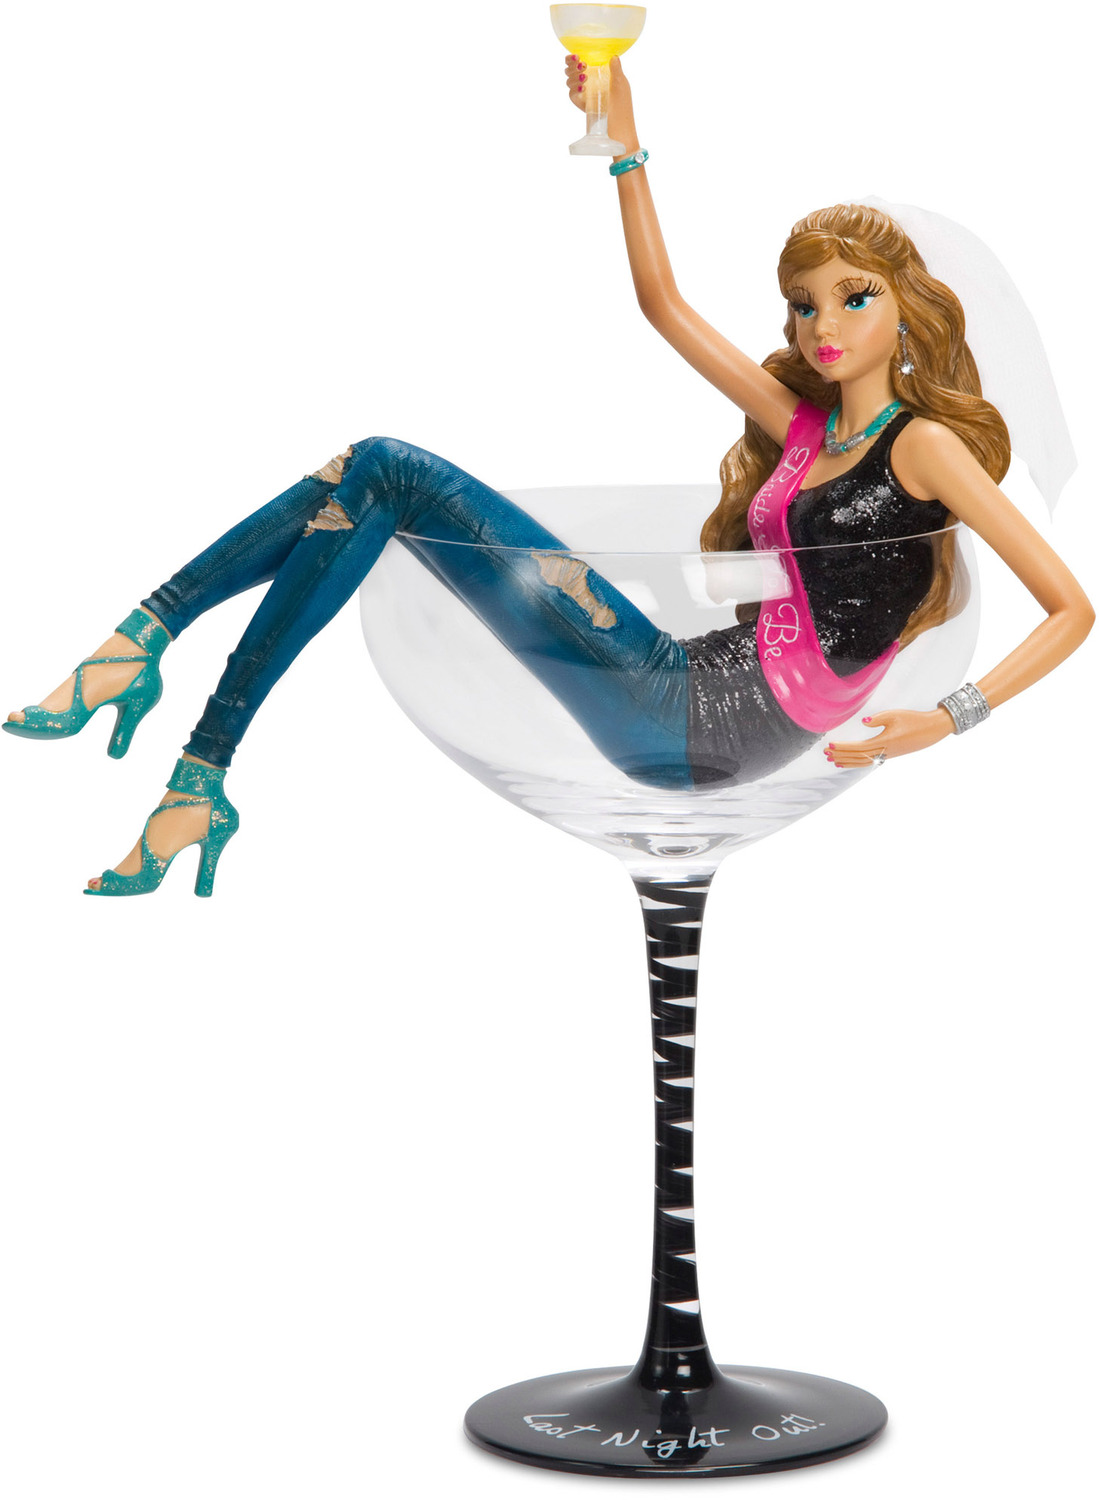 Last Night Out! by Hiccup - <em>Bachelorette</em> - Girl Figurine & Wine Glass -